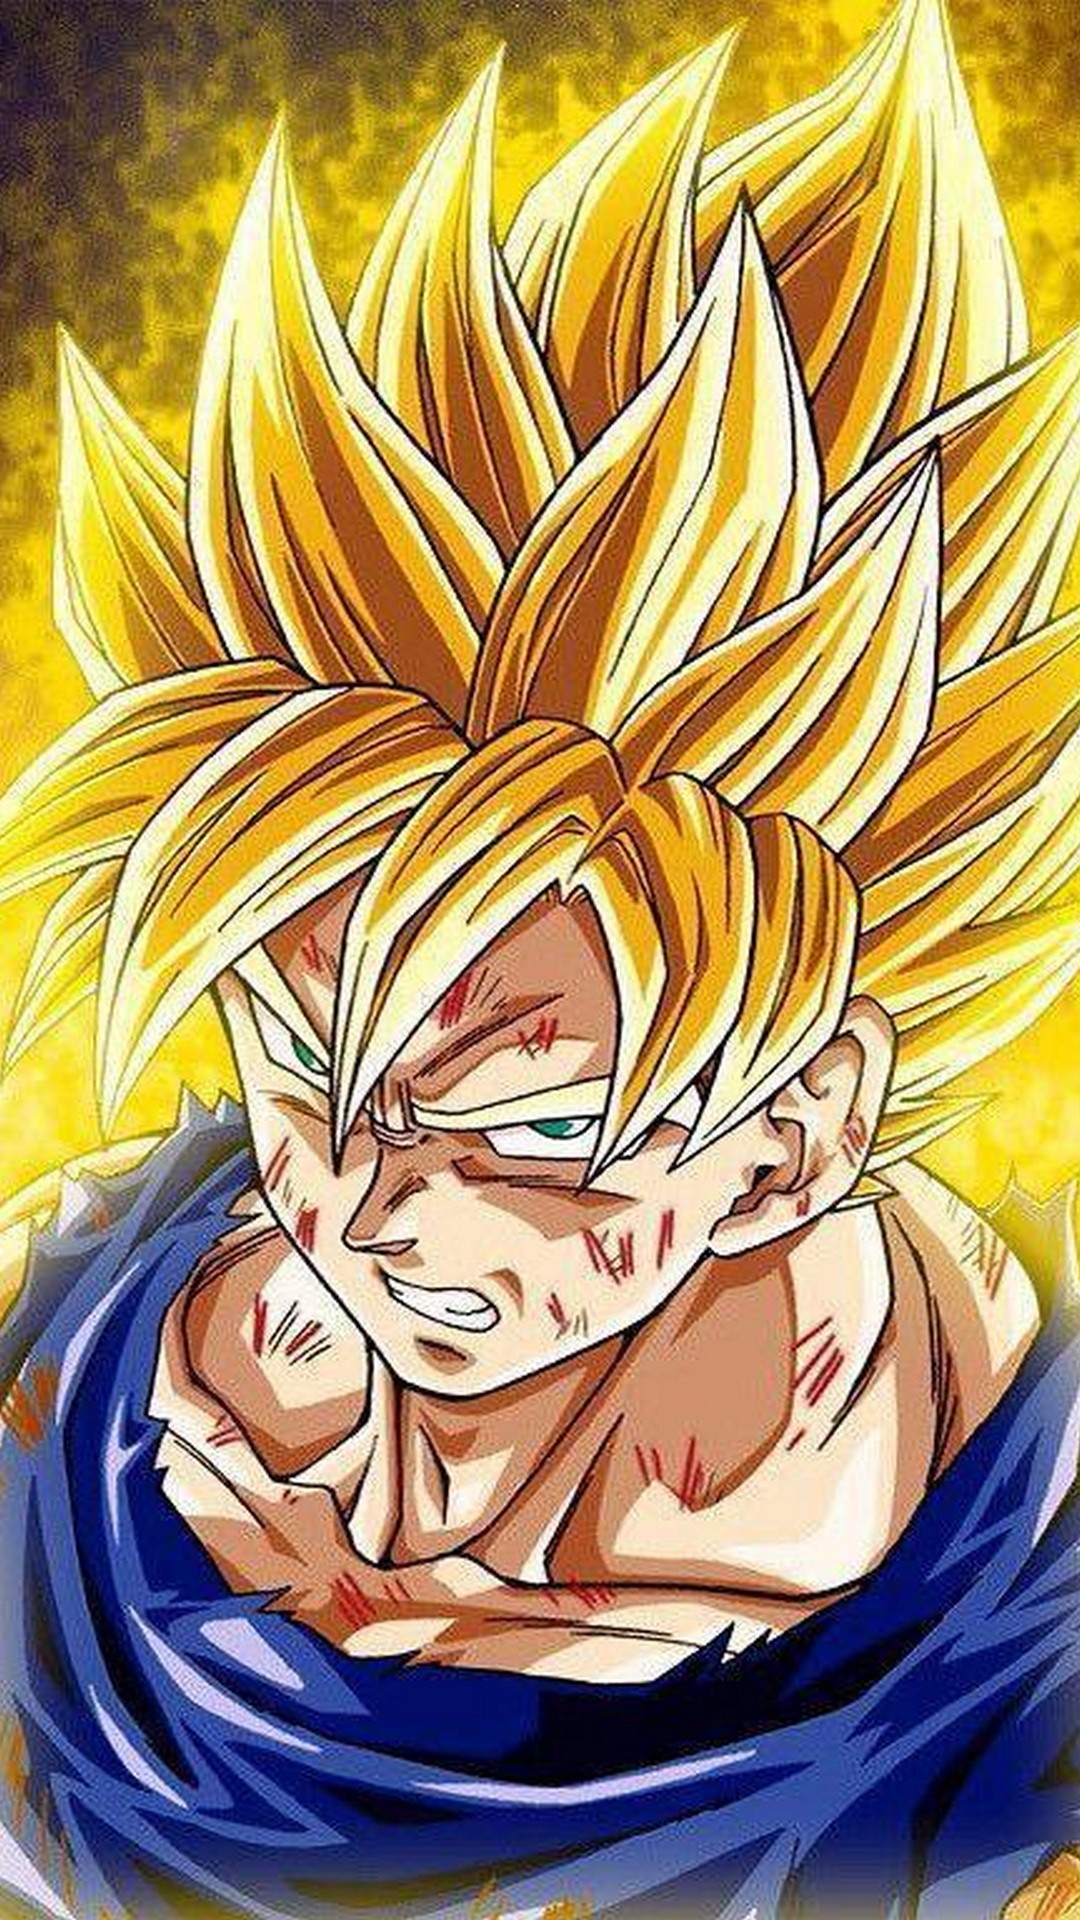 Goku Wallpaper Mobile with high-resolution 1080x1920 pixel. You can use and set as wallpaper for Notebook Screensavers, Mac Wallpapers, Mobile Home Screen, iPhone or Android Phones Lock Screen